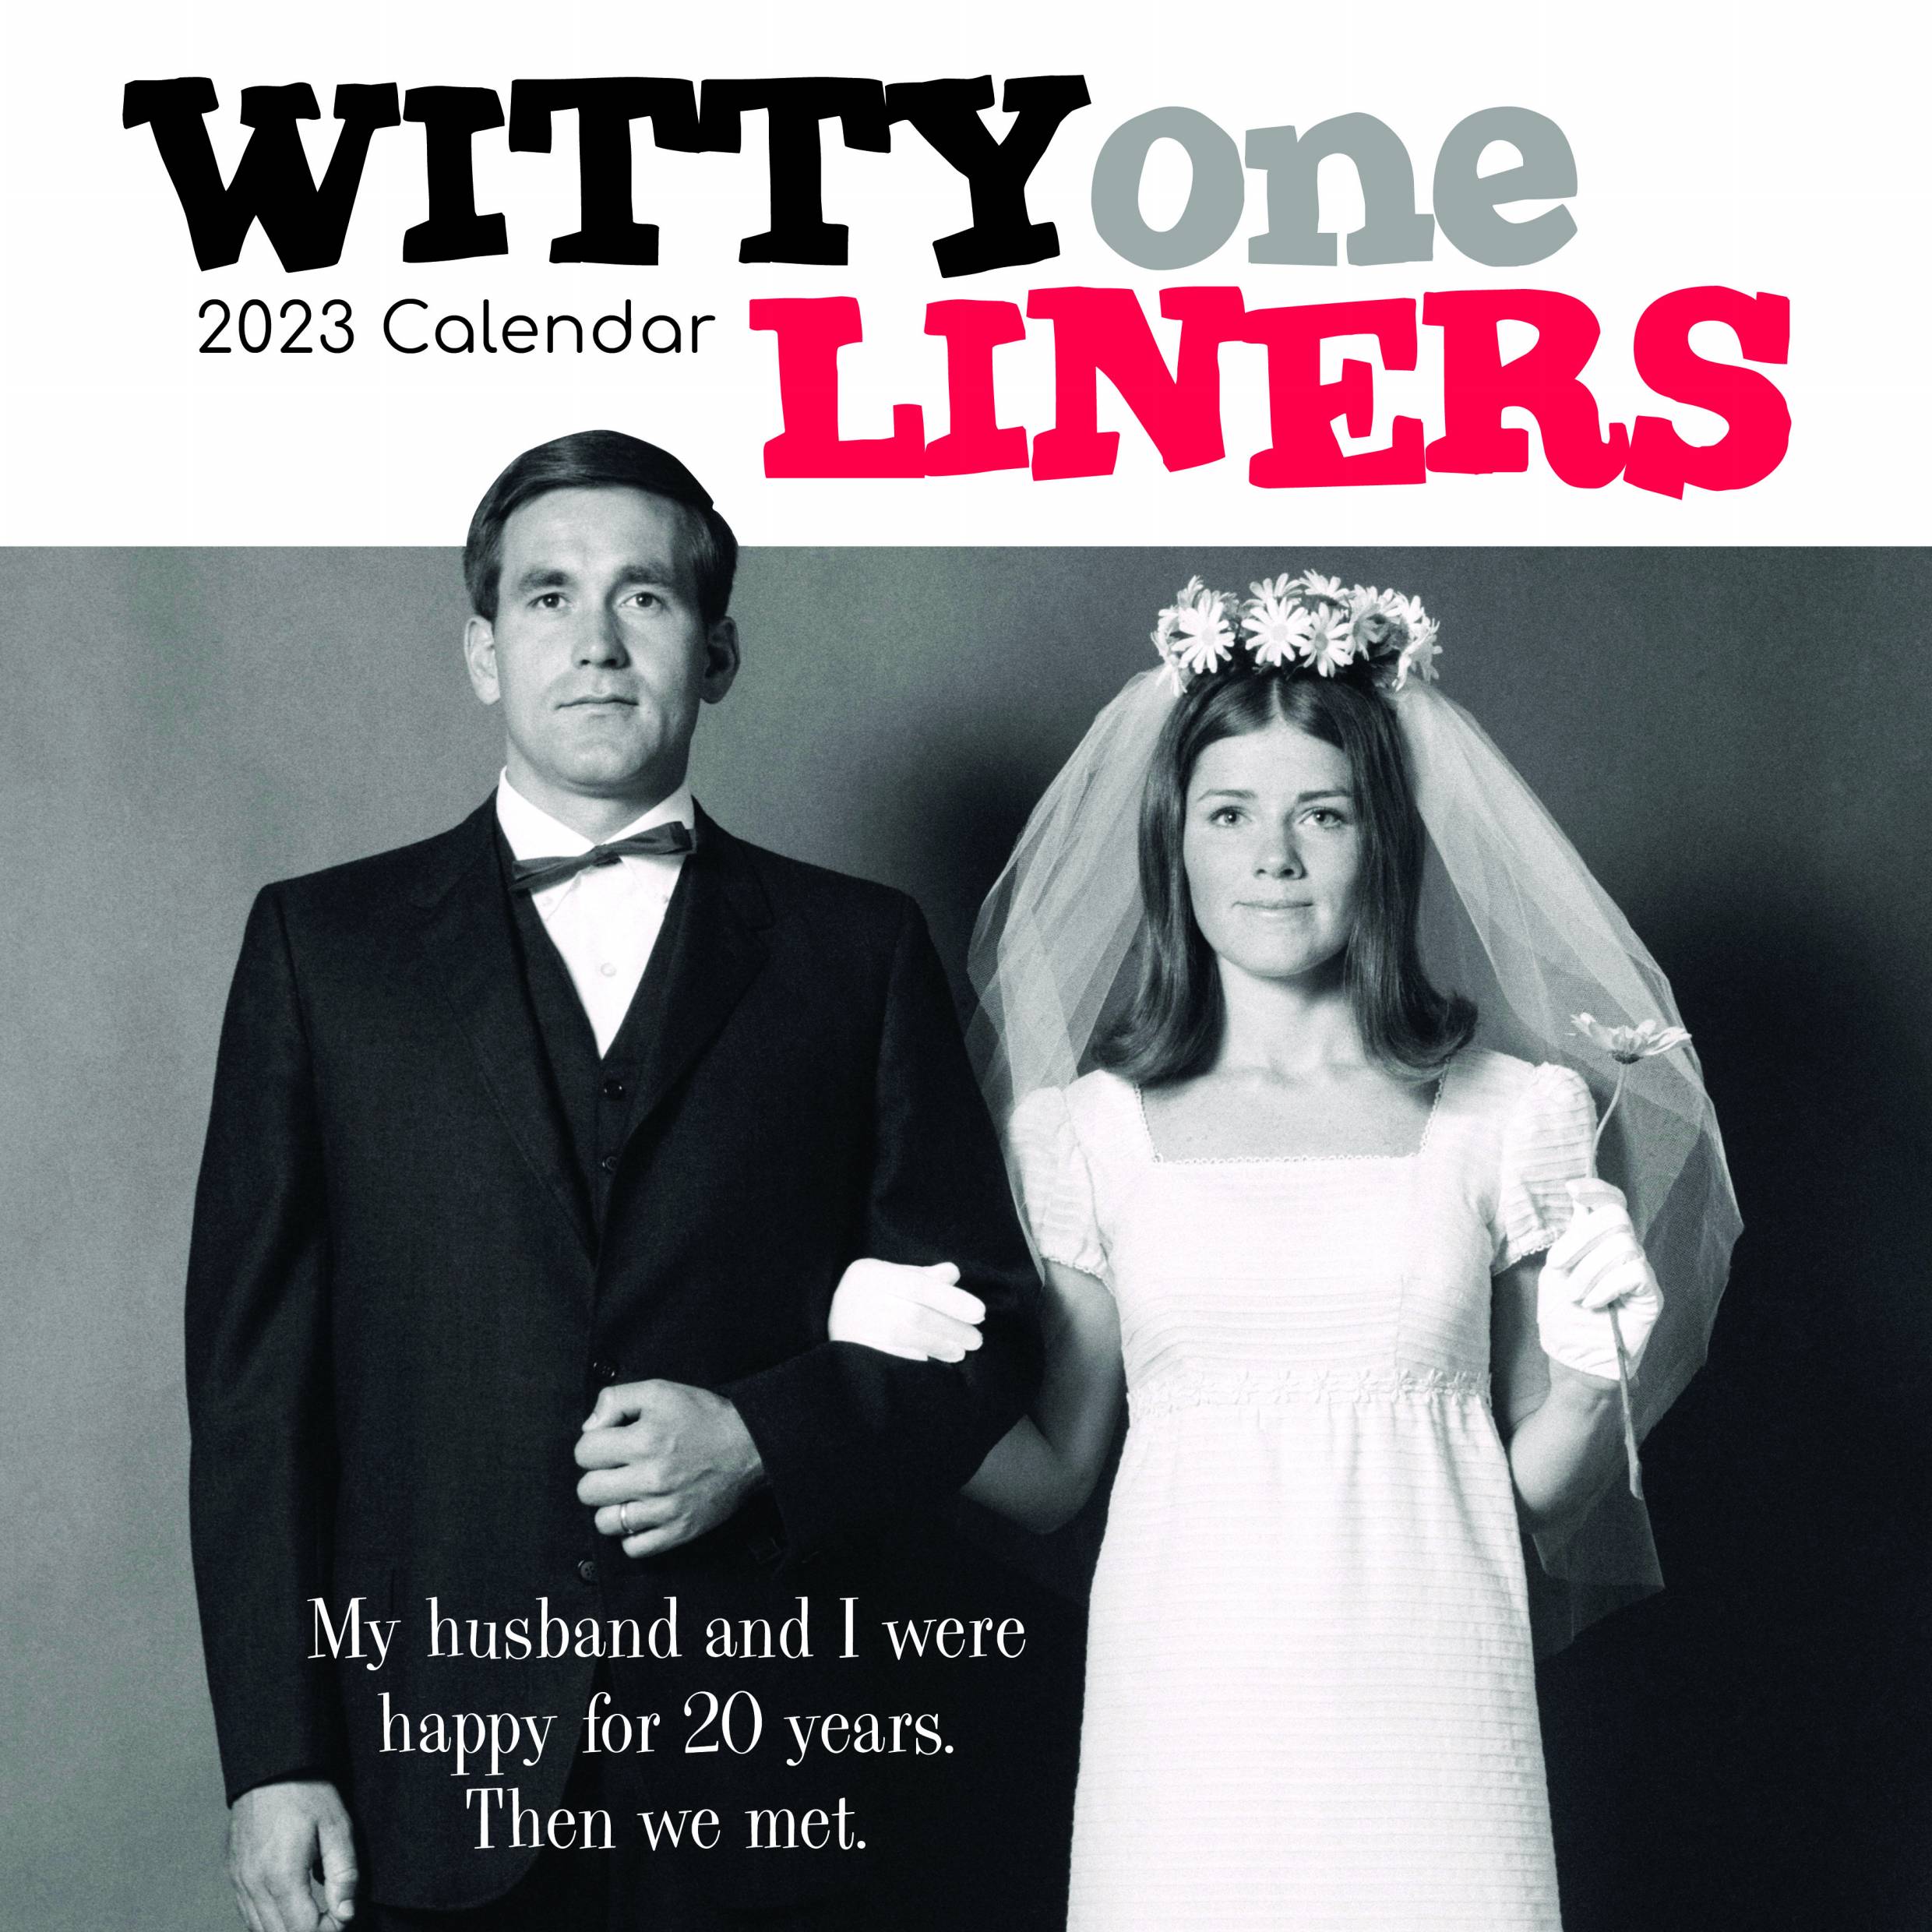 2023 Witty One Liners - Square Wall Calendar